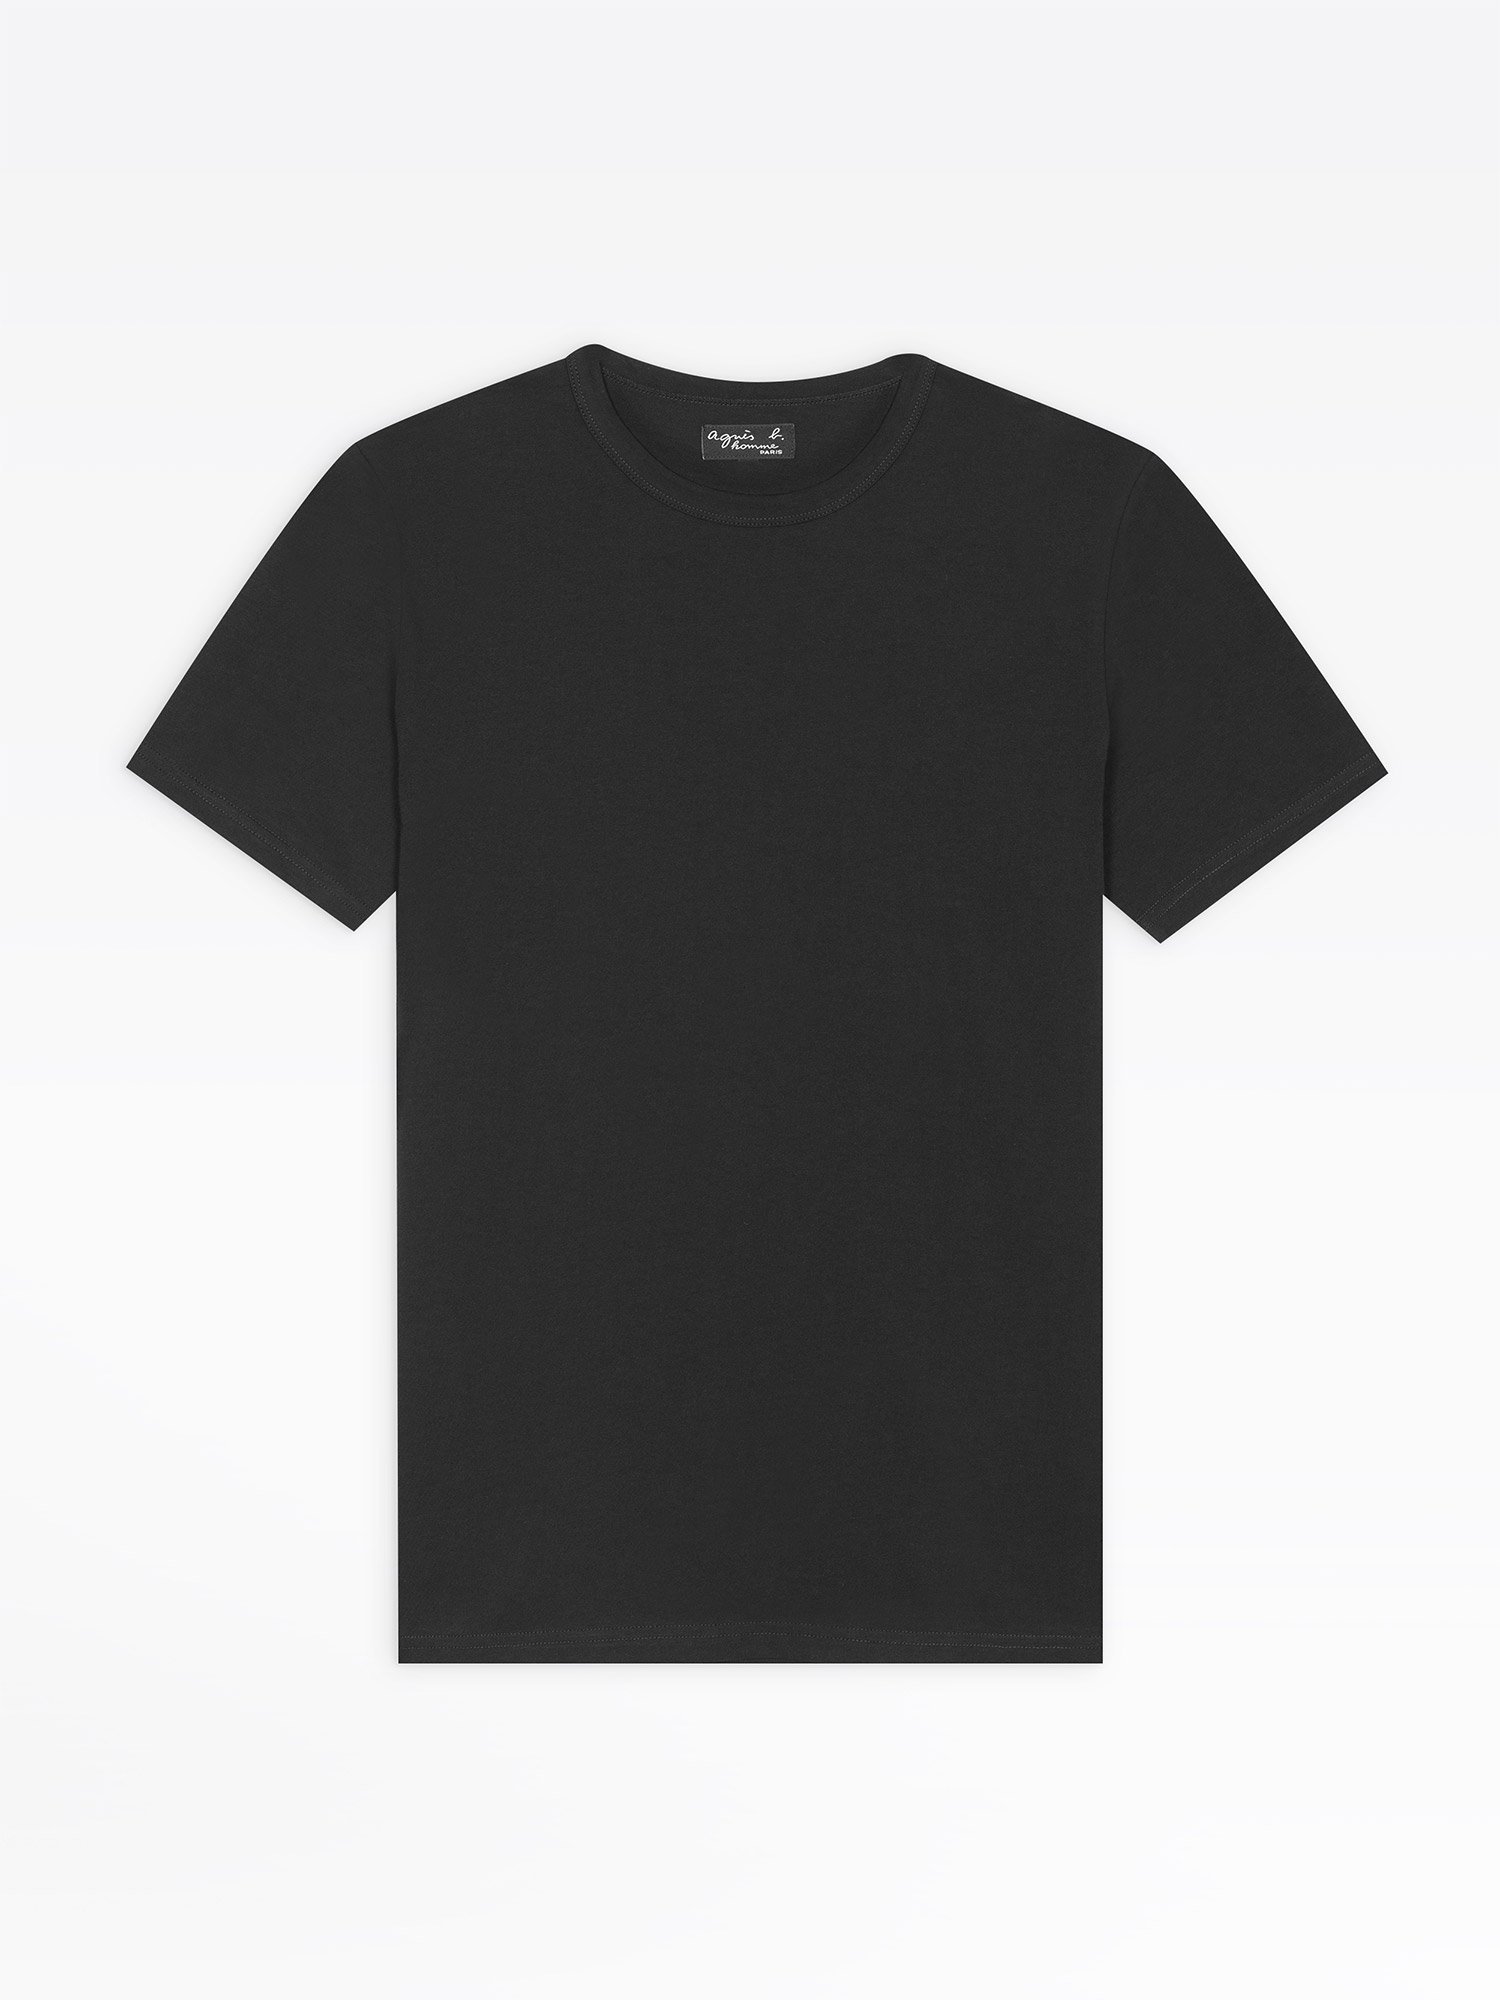 Download Black T-Shirt - Black T Shirt Mockup Free Mockup Download : Because of its timeless appeal and ...